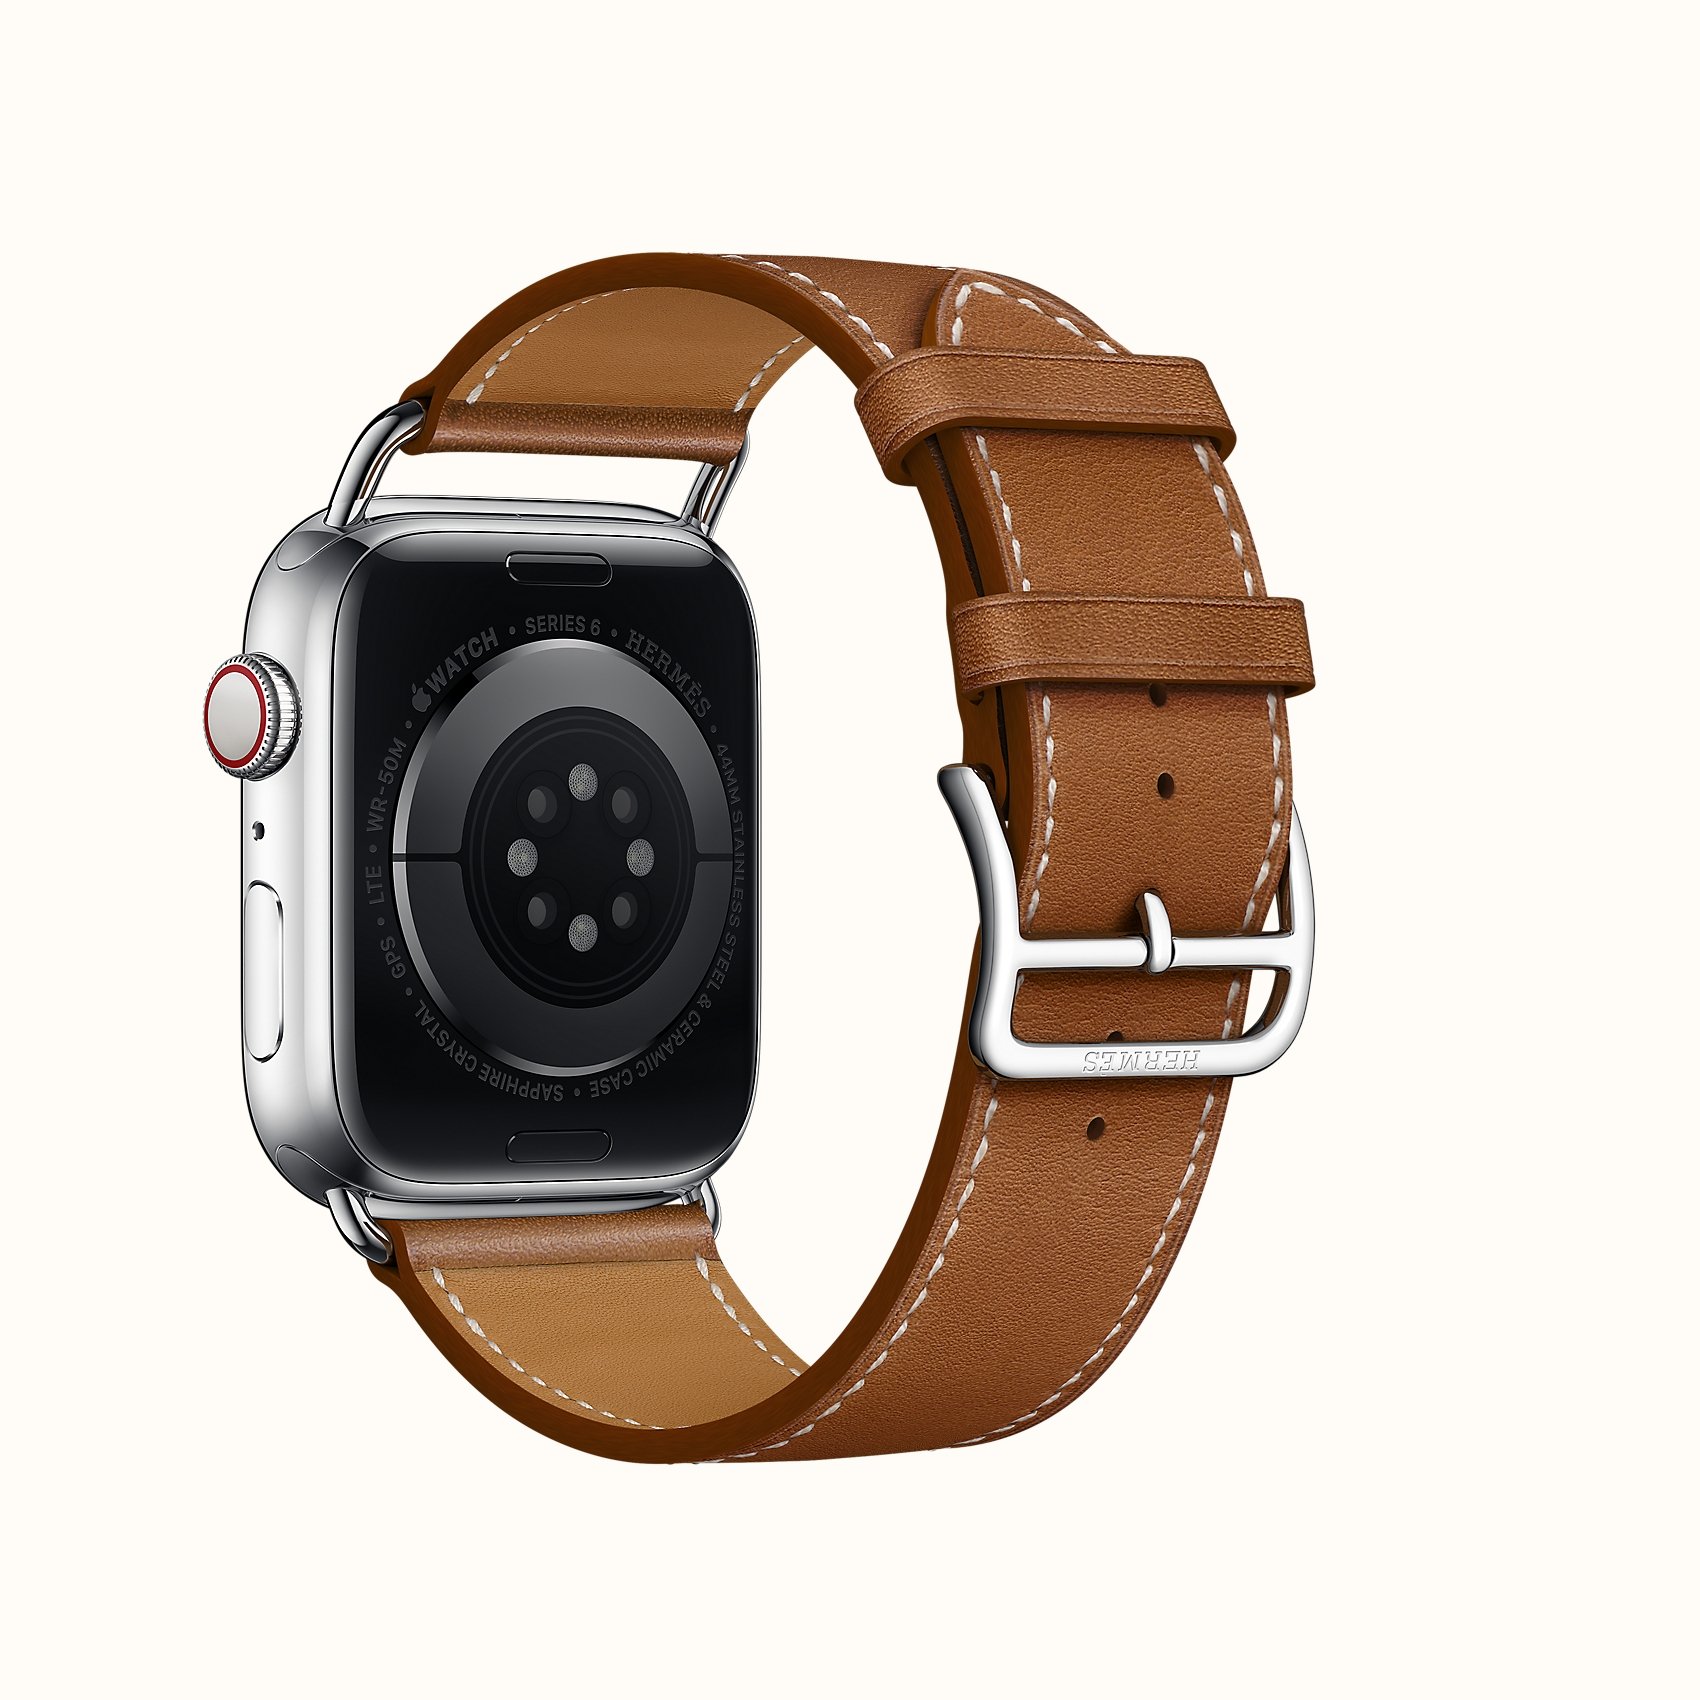 Hermès Apple Watch Series 6 with Single Tour 44 mm Attelage band - The